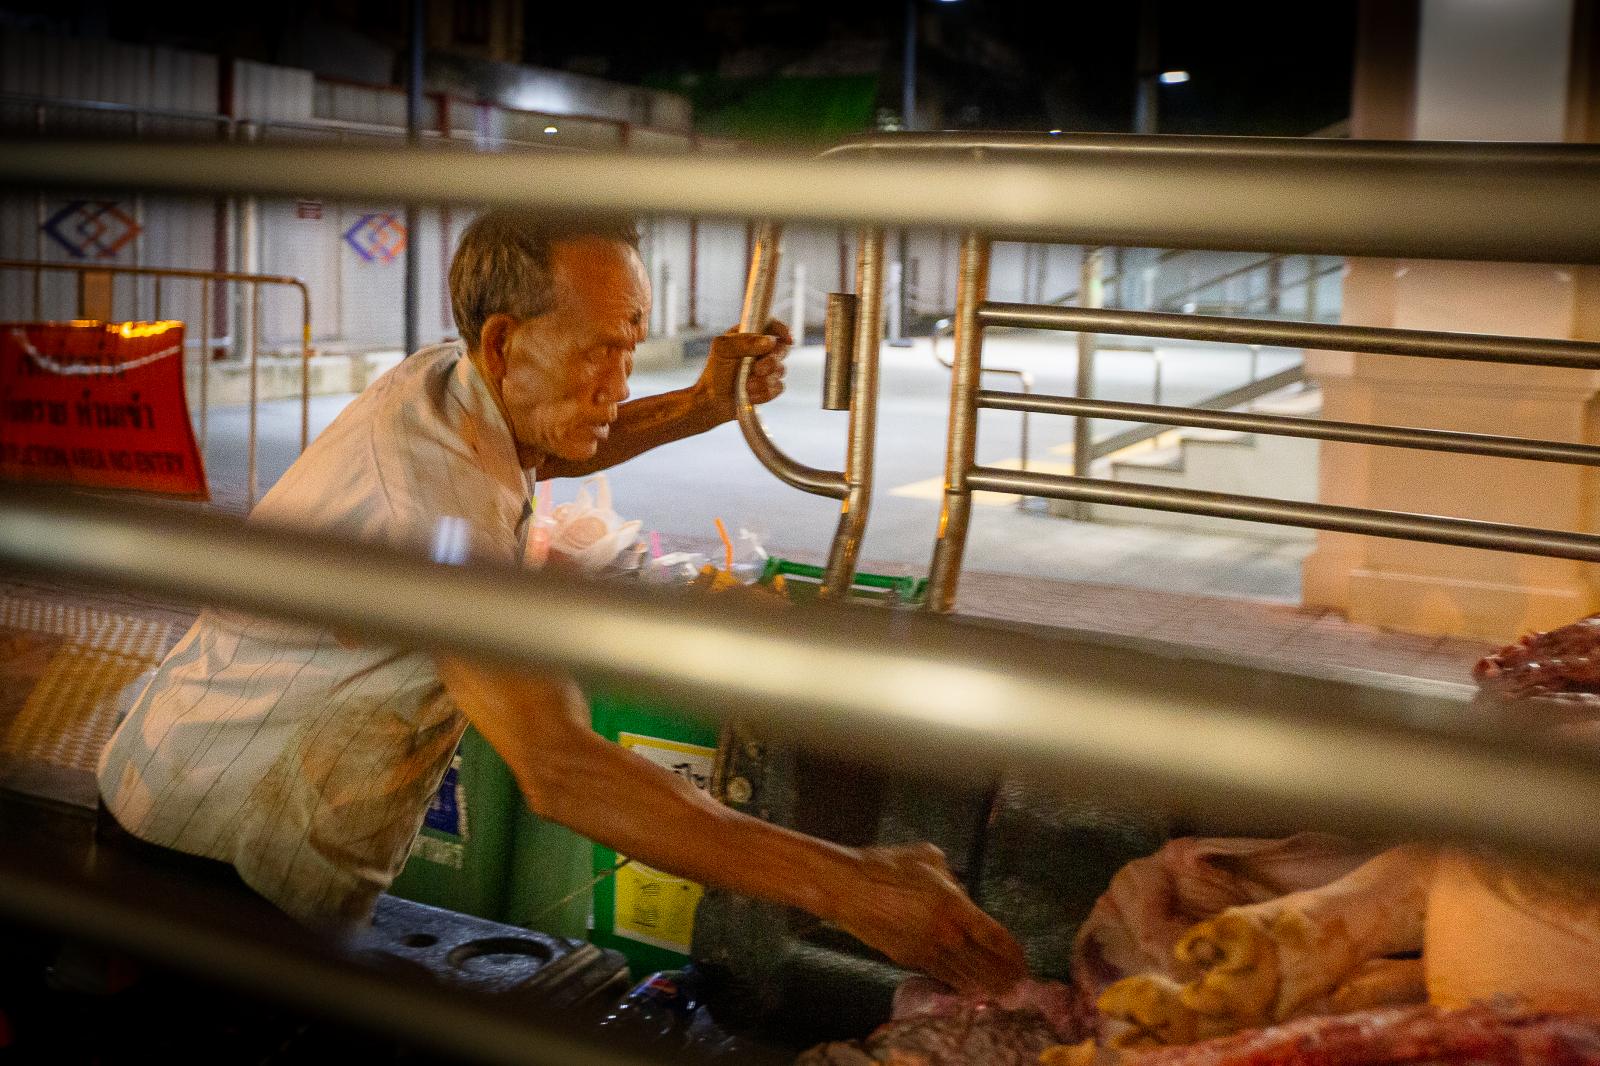 Unloading pig carcasses in front of a subway station